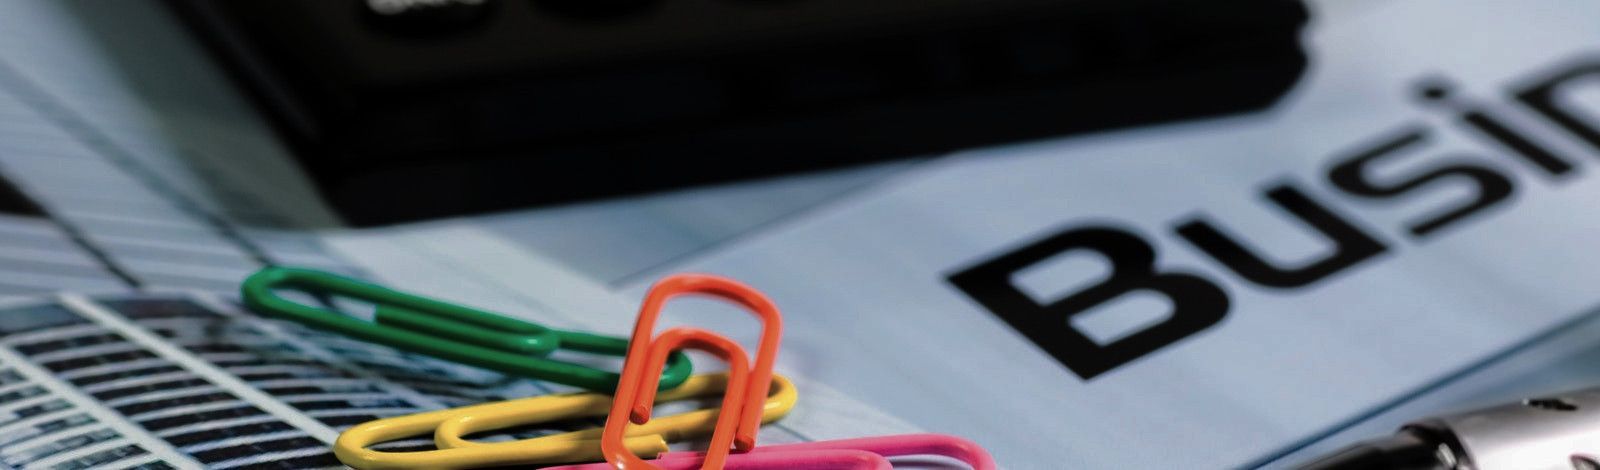 Closeup photo of miscellaneous paperwork and desk supplies, including colorful paperclips, charts, the bottom edge of a calculator, and the word "Business." The colorful paperclips are in the left half of the photo in the foreground and are orange, yellow